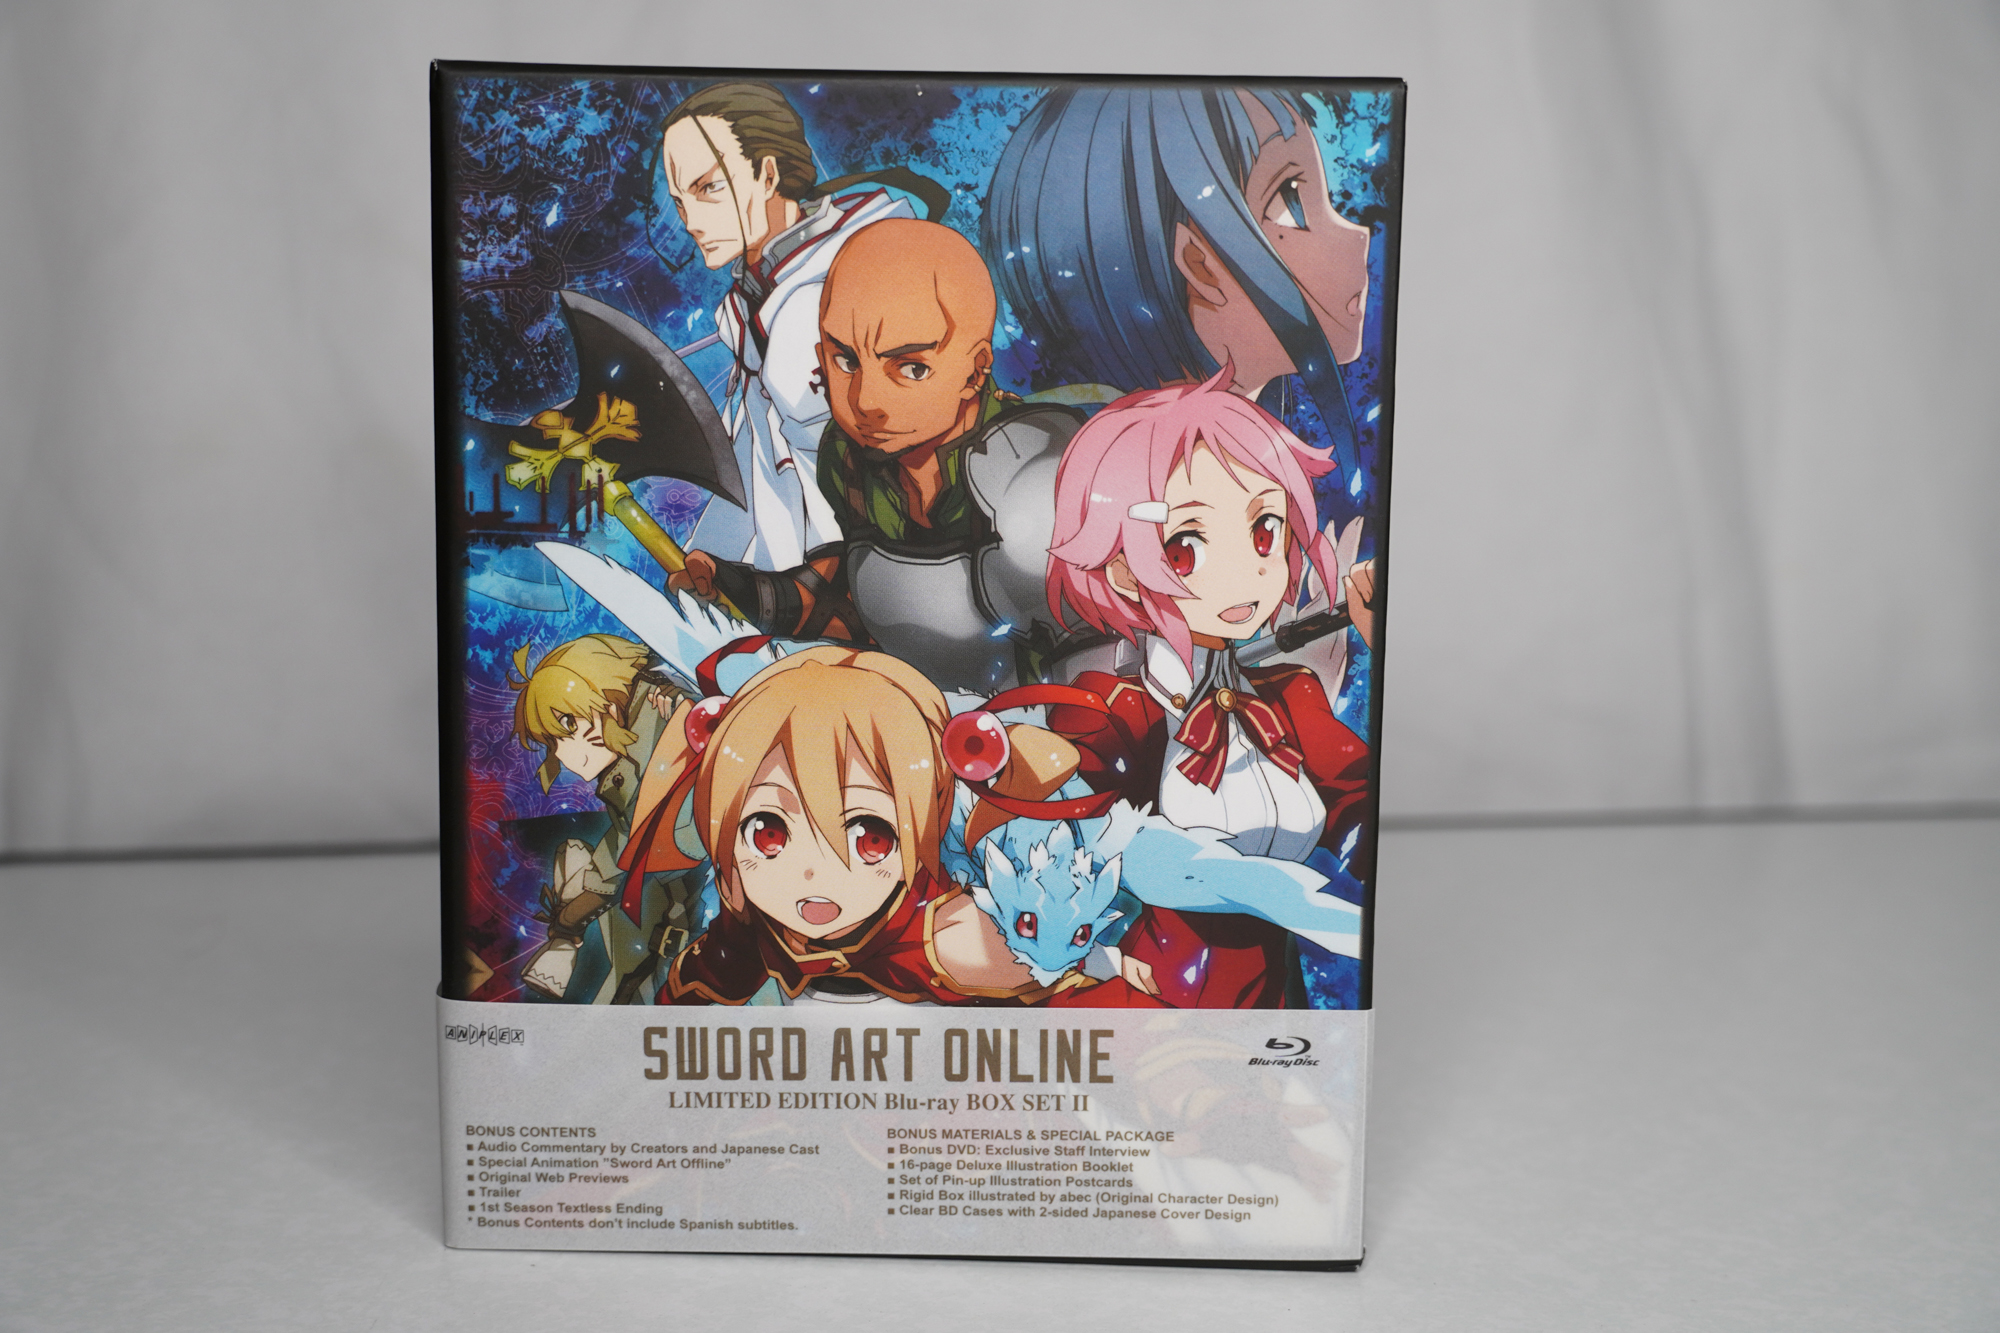 Sword Art Online Limited Edition Box Set 2 Unboxing | hXcHector.com